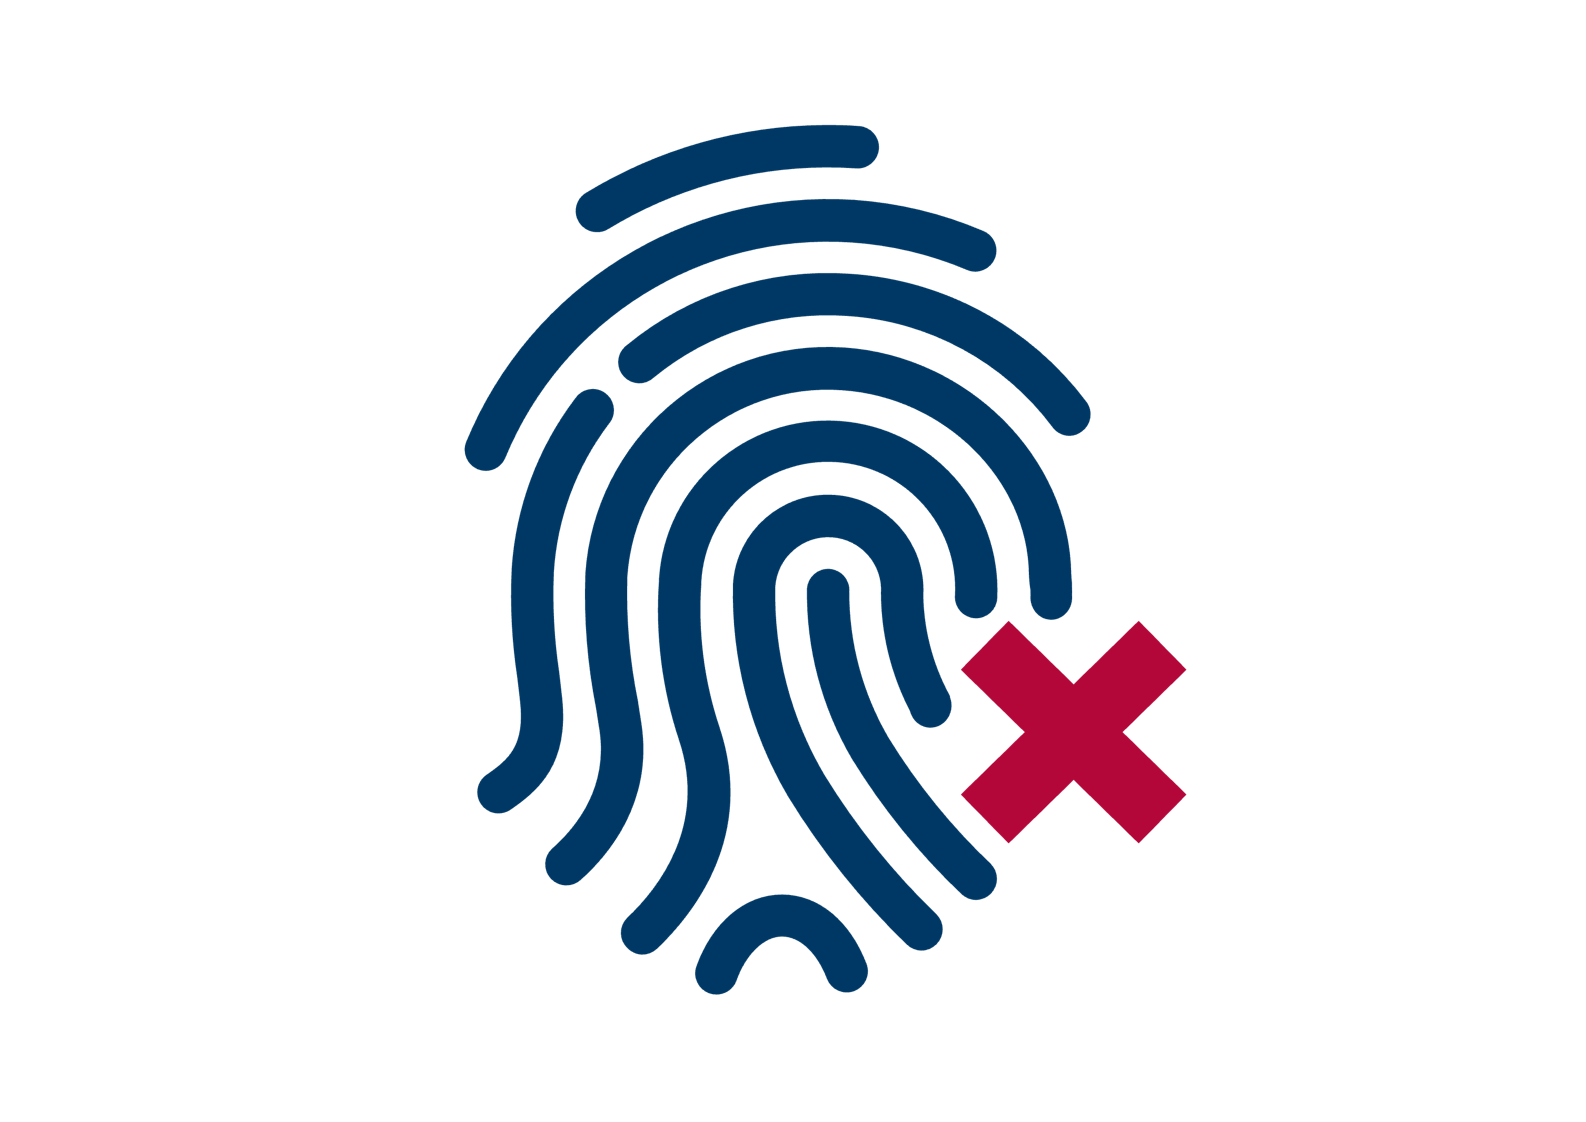 Dark blue fingerprint icon with red x on the right side